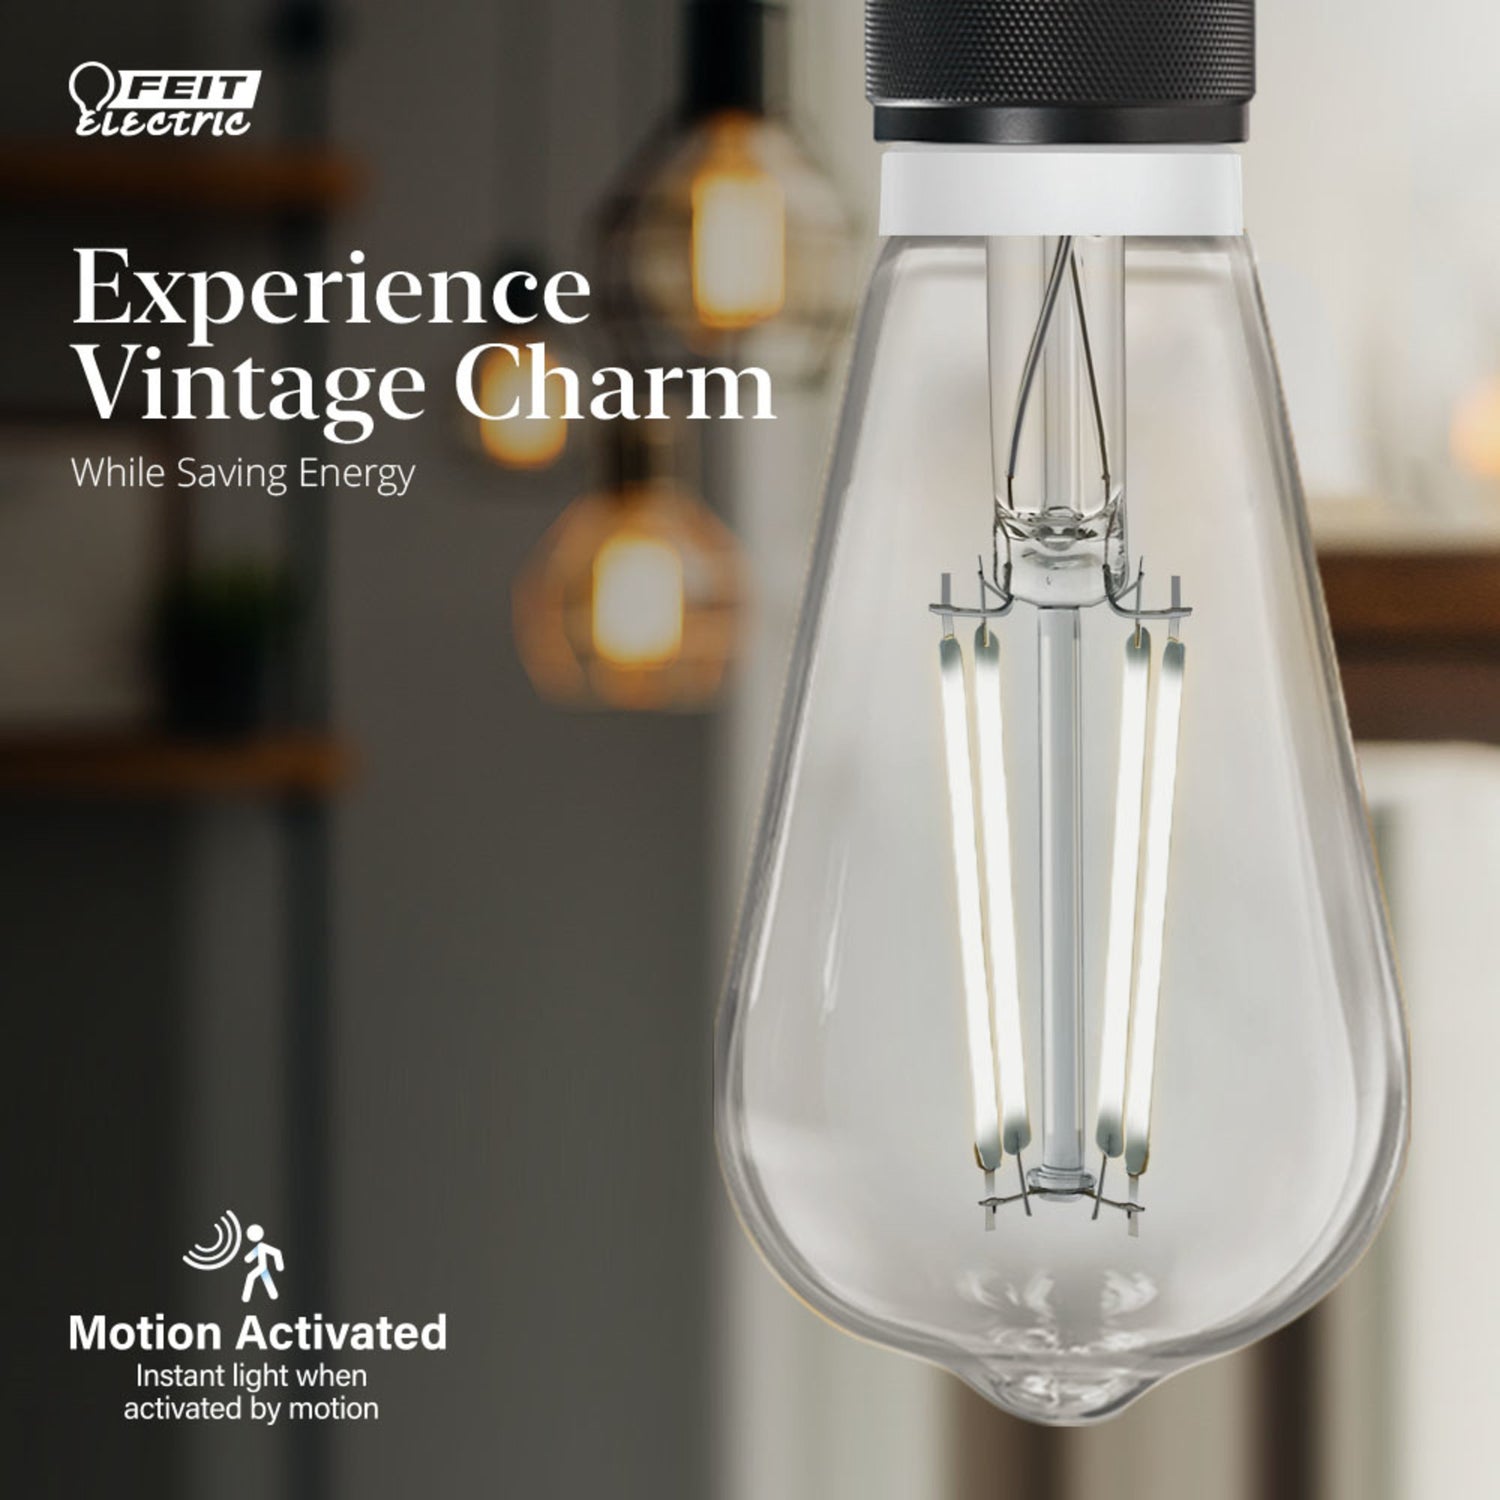 8.8W (60W Replacement) ST19 E26 Motion Activated Straight Filament Clear Glass Vintage Edison LED Light Bulb, Daylight